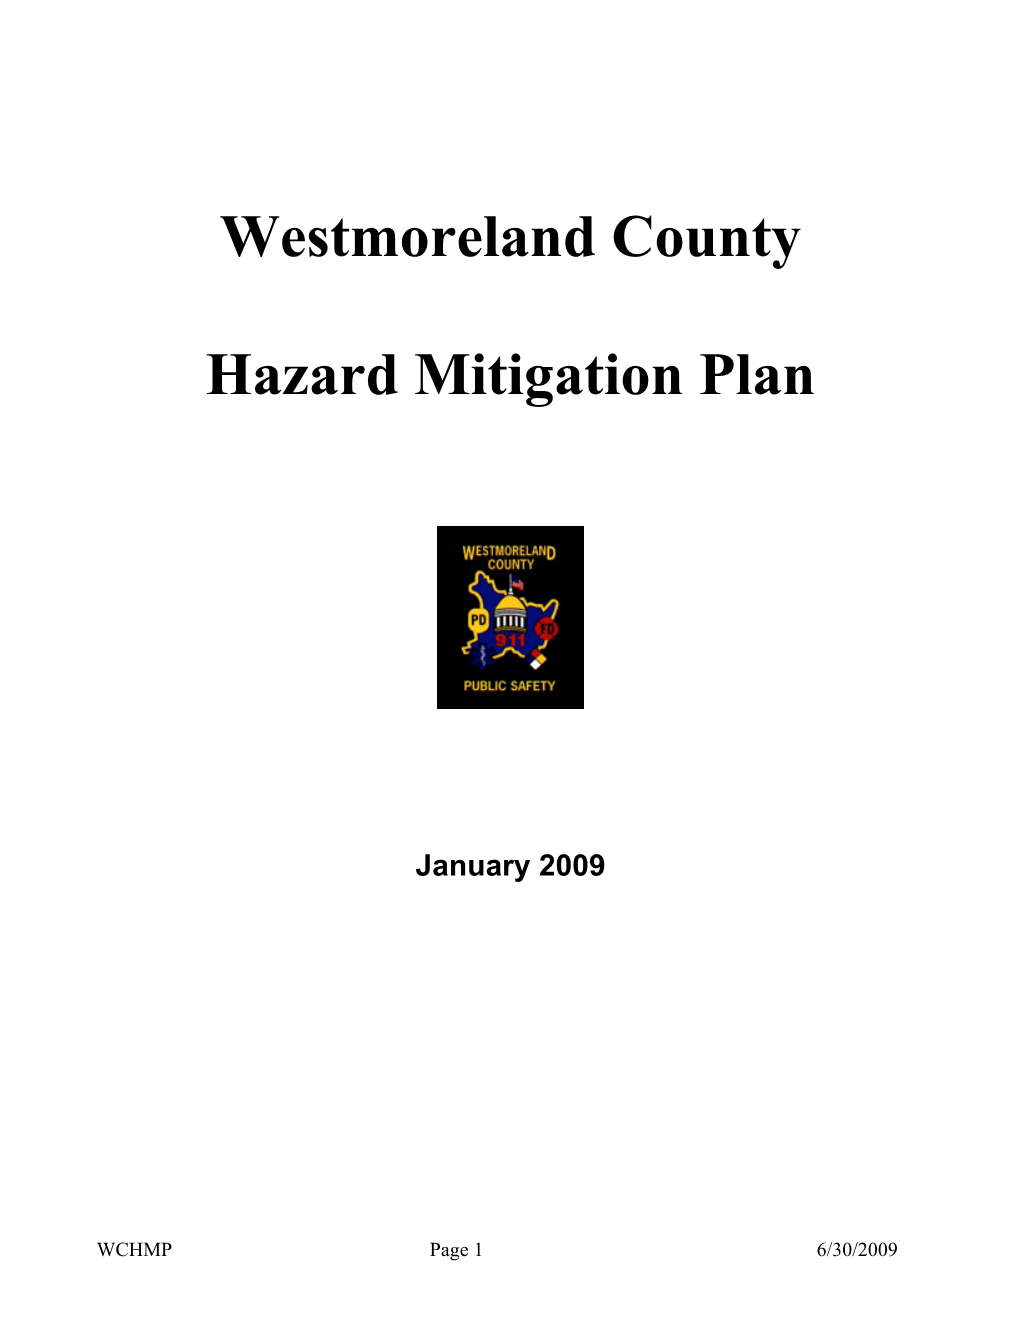 2009 Plan Describes the Purpose and Need for the Plan, the Scope of This Effort, and the Plan Organization